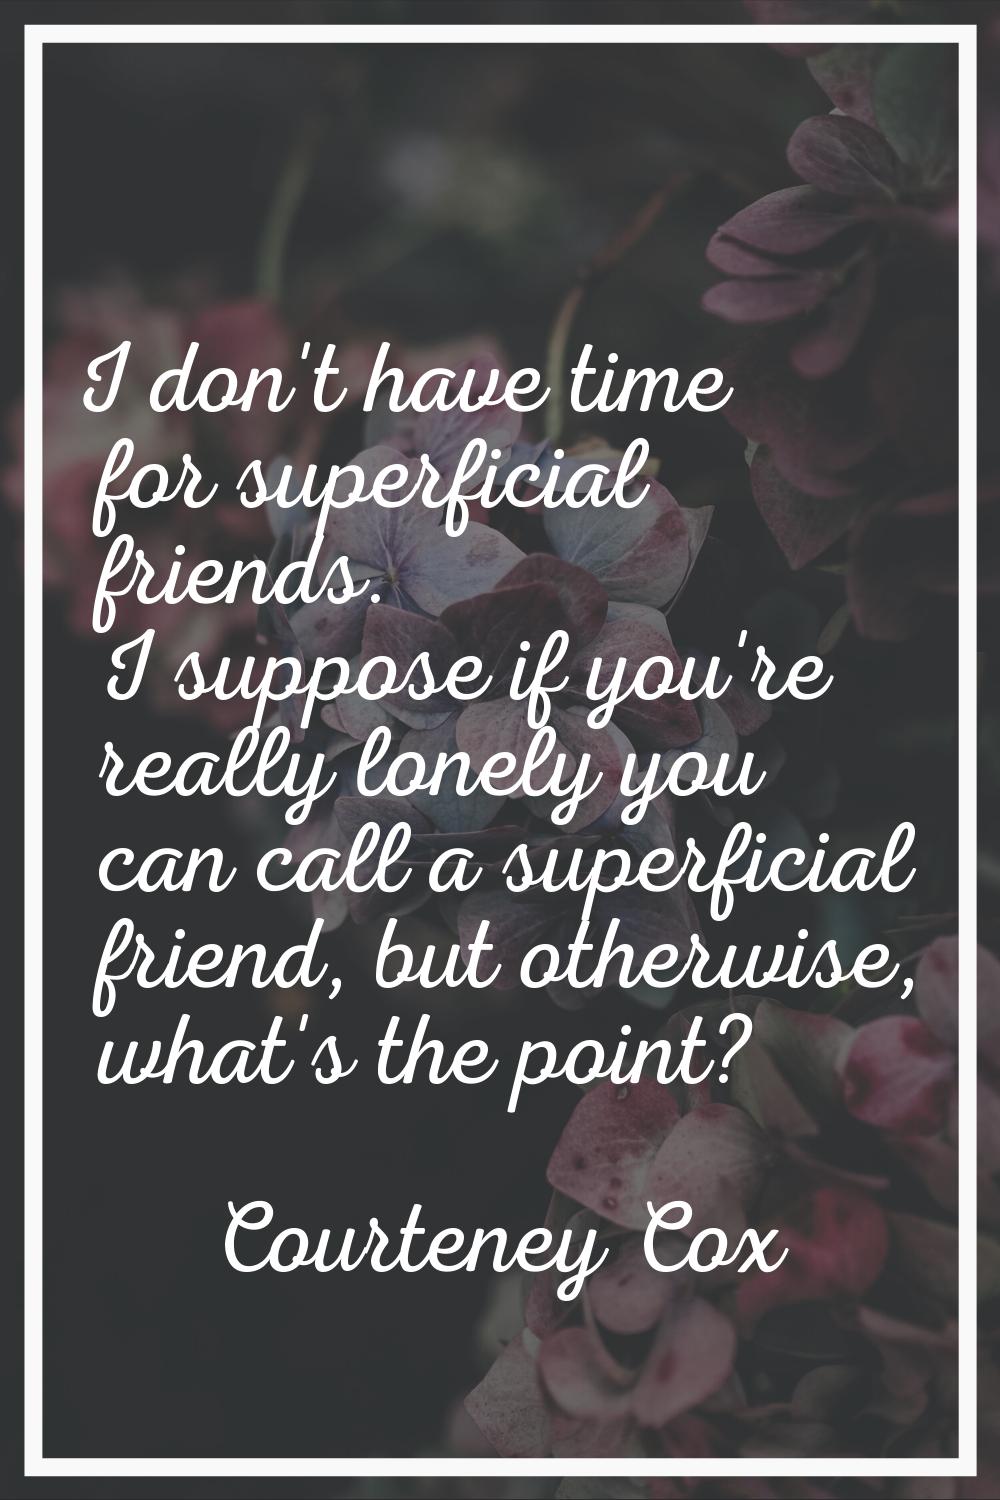 I don't have time for superficial friends. I suppose if you're really lonely you can call a superfi